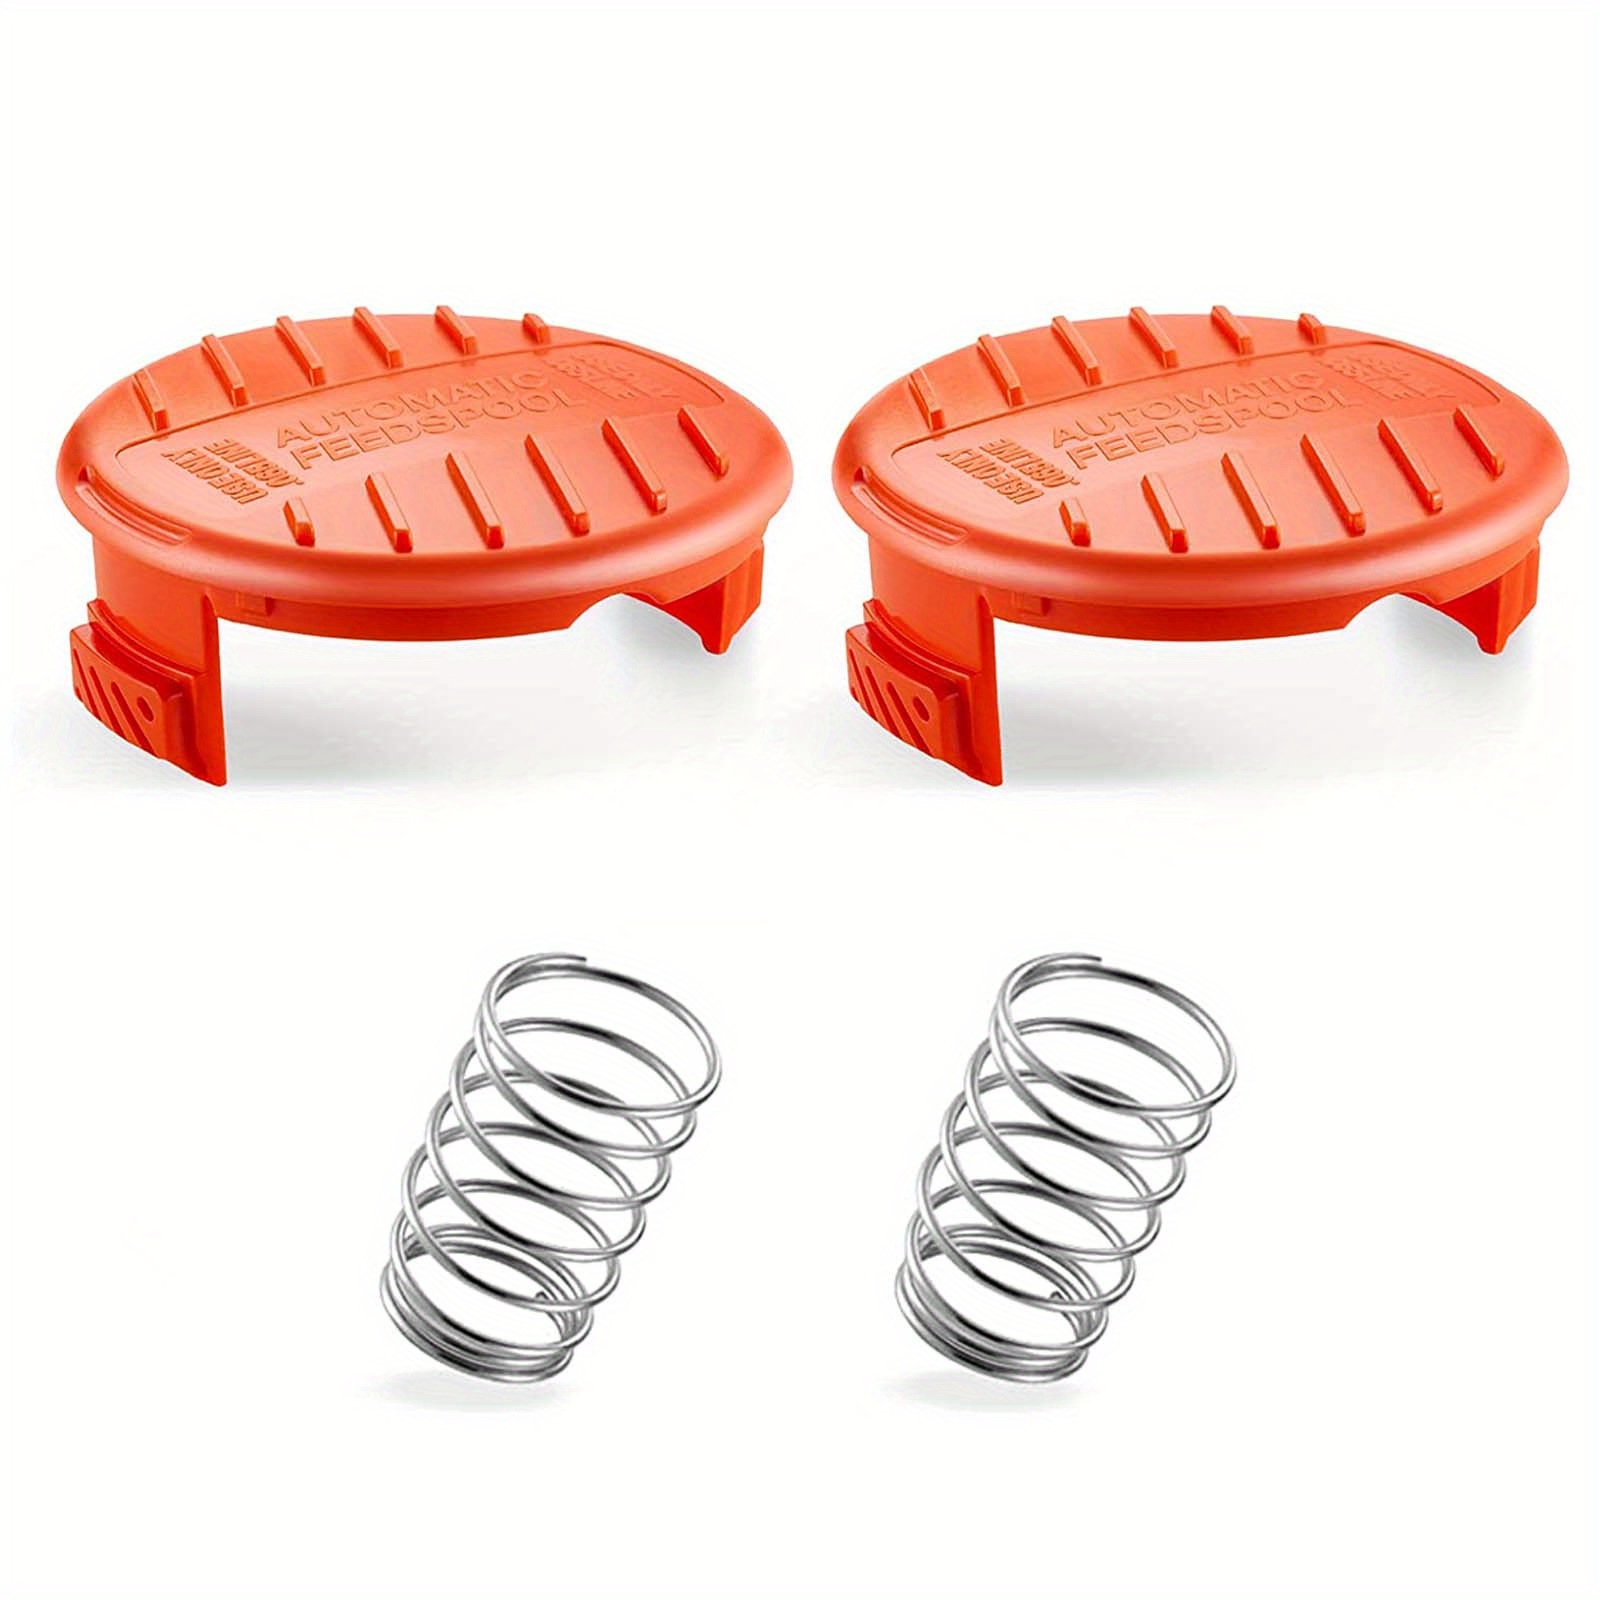 Black+decker Trimmer Line & Spring - Replacement Spool Covers